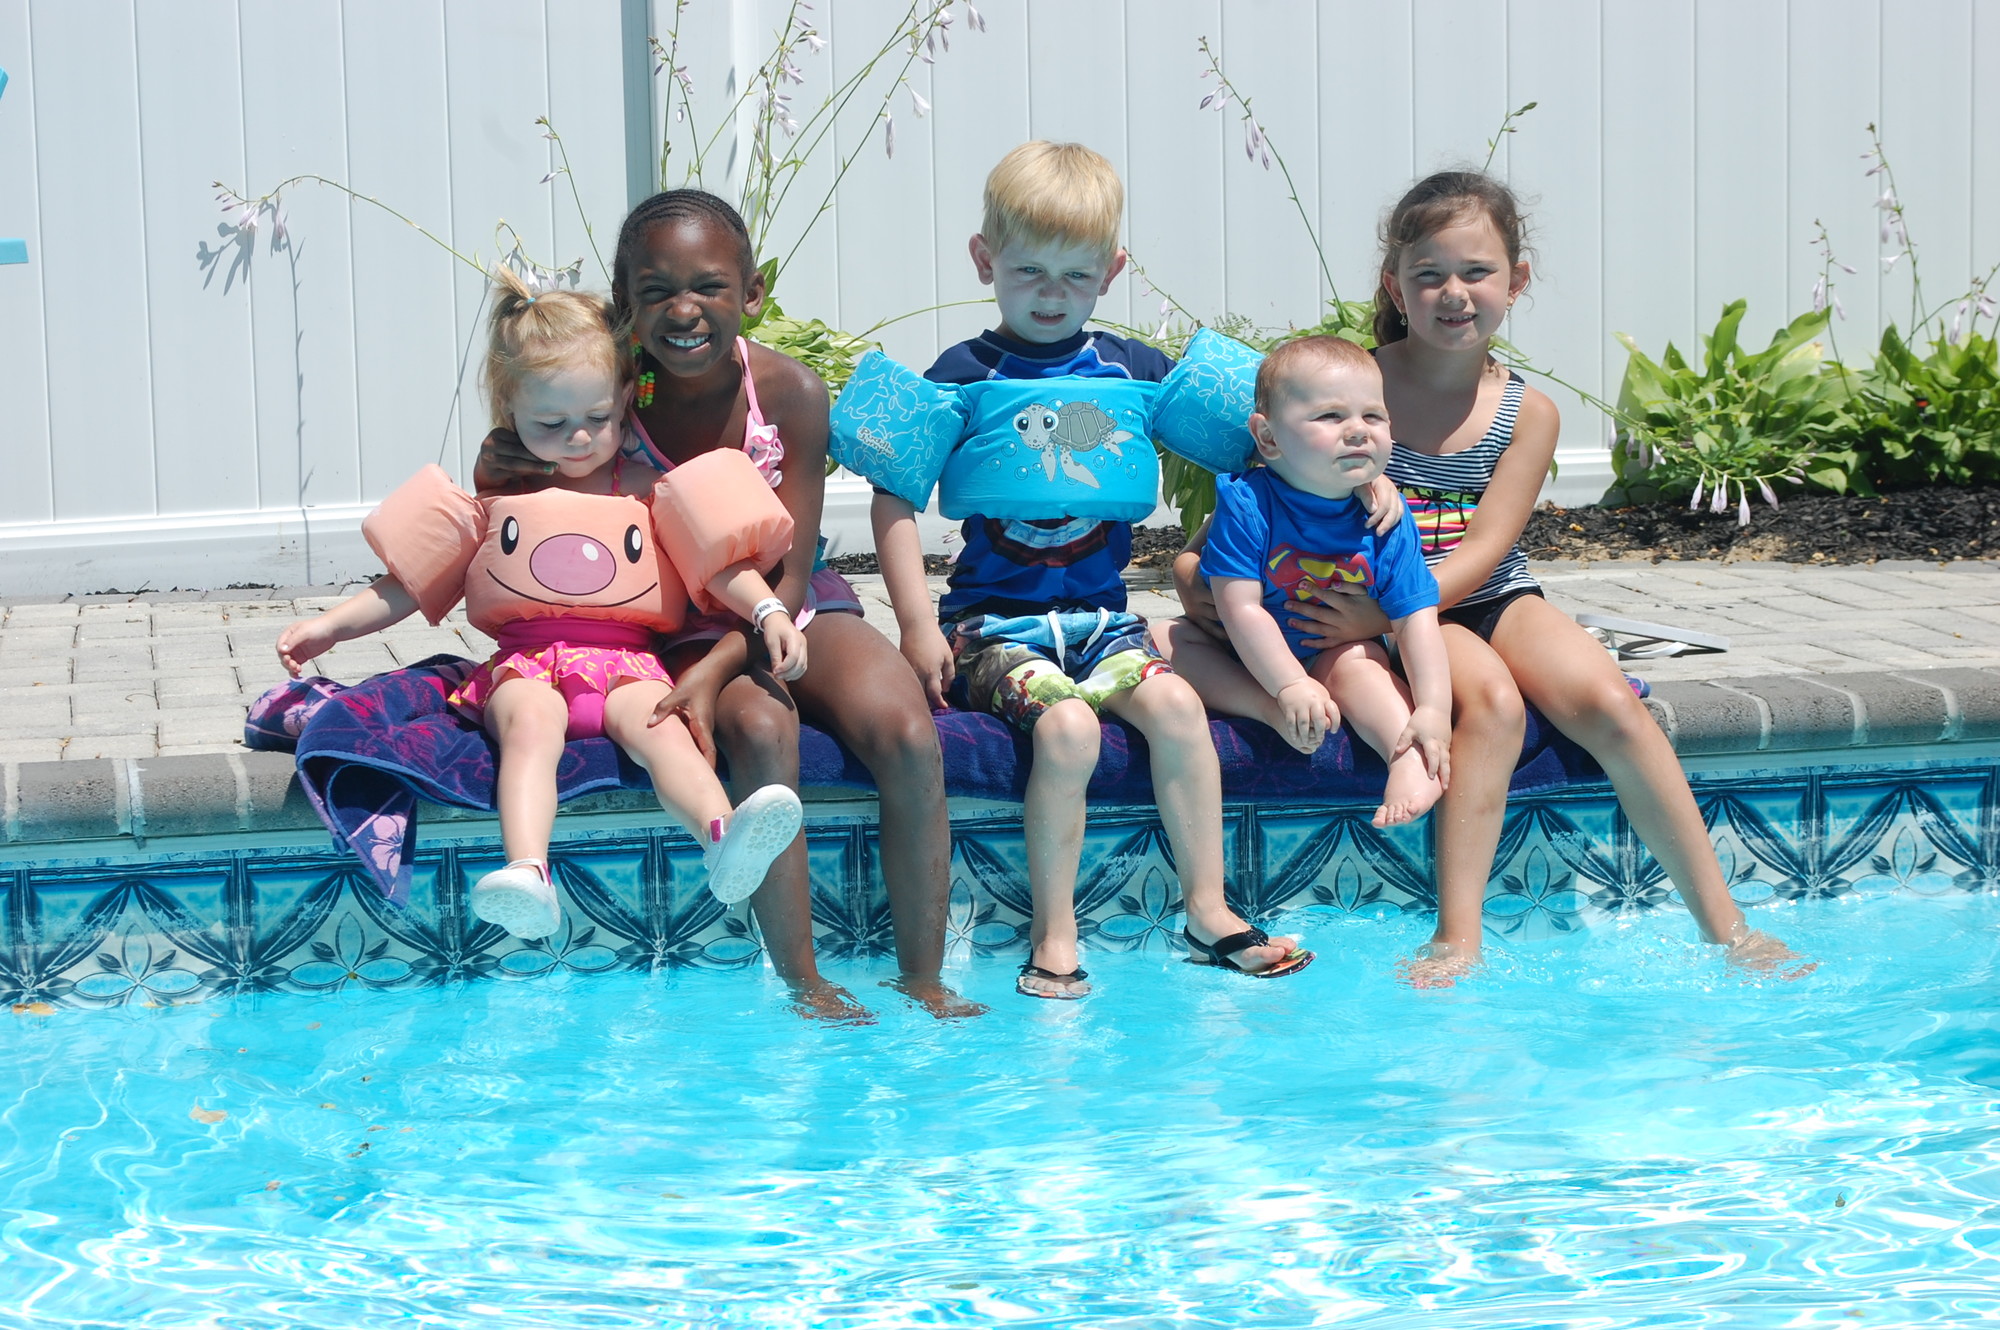 Sade Miller, second from left, has enjoyed the pool during her two summers at Frank and Peggy Marenghi’s house in Seaford. She was joined by their grandchildren, from left, Avery and Brennan Lullo, Lorenzo Suriano and Kailey McKinney.